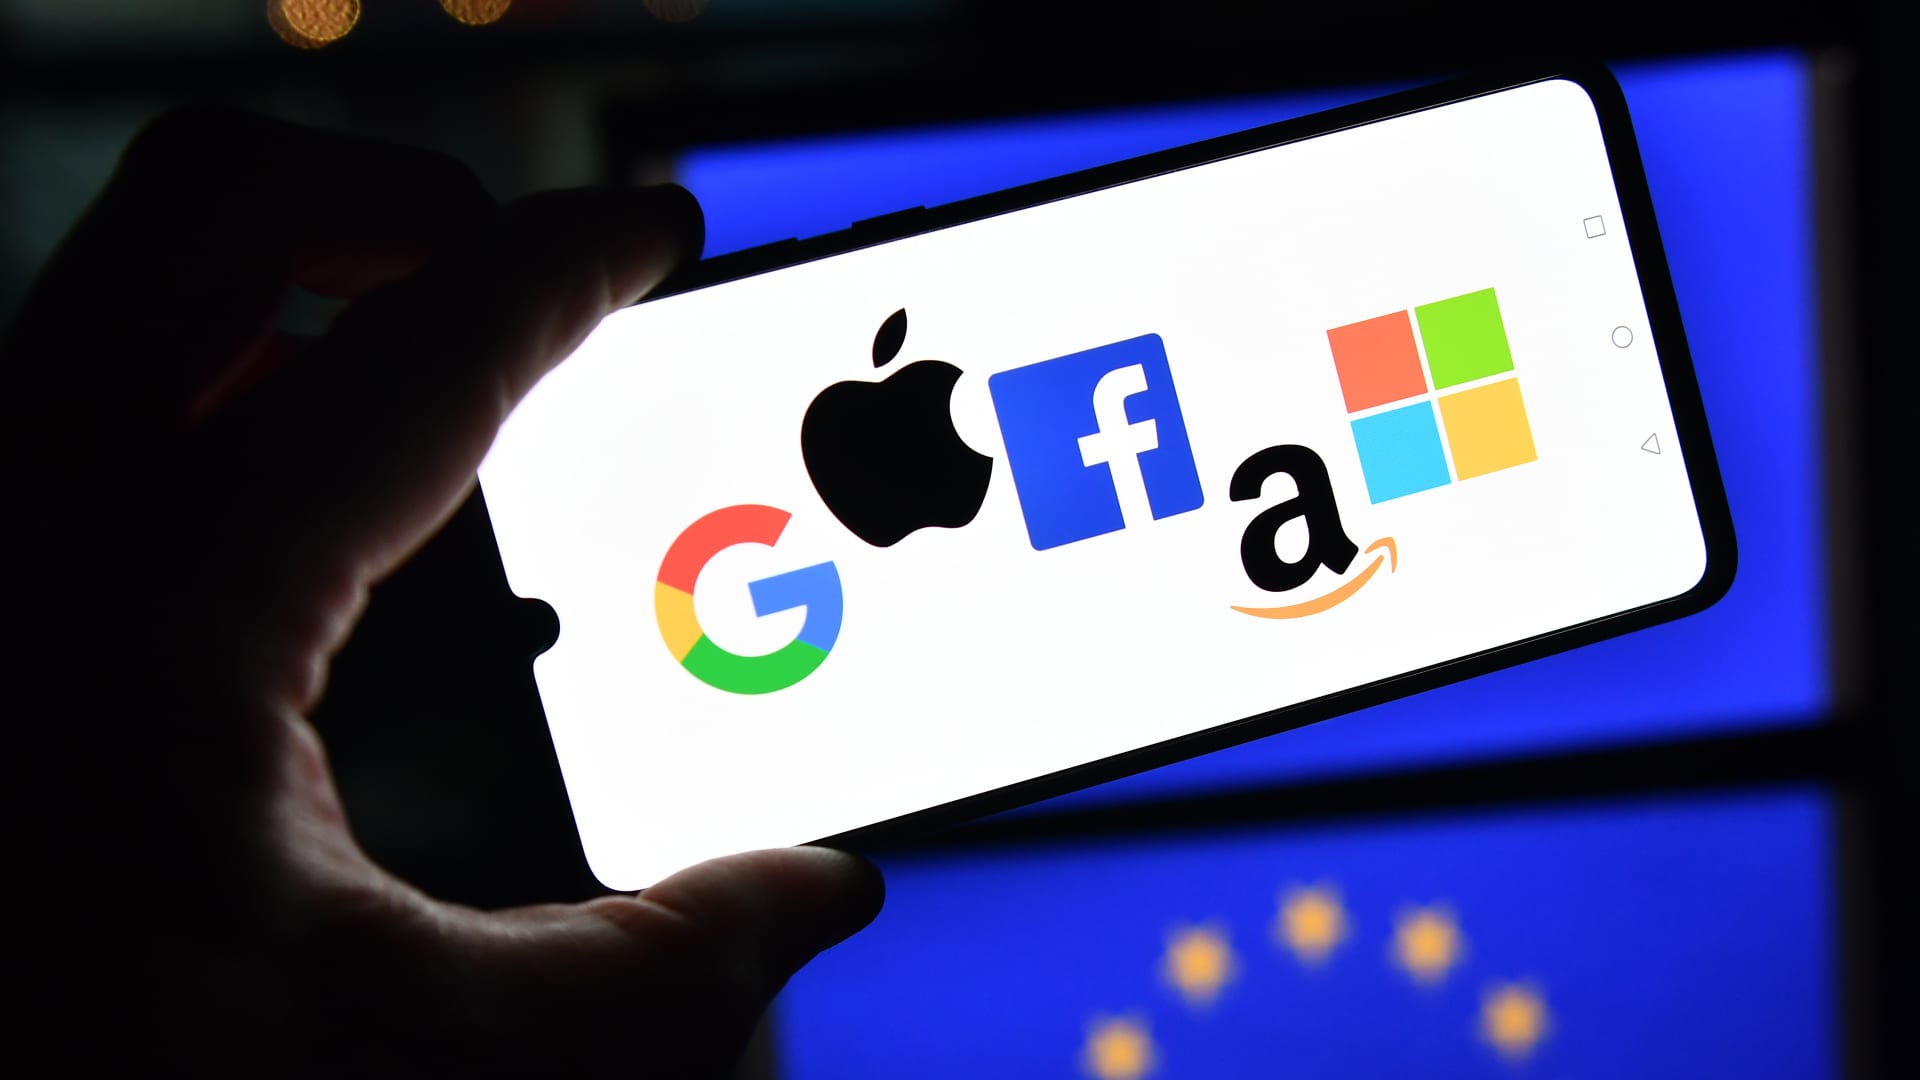 The logos of Google, Apple, Facebook, Amazon and Microsoft displayed on a mobile phone with an EU flag pictured in the background.